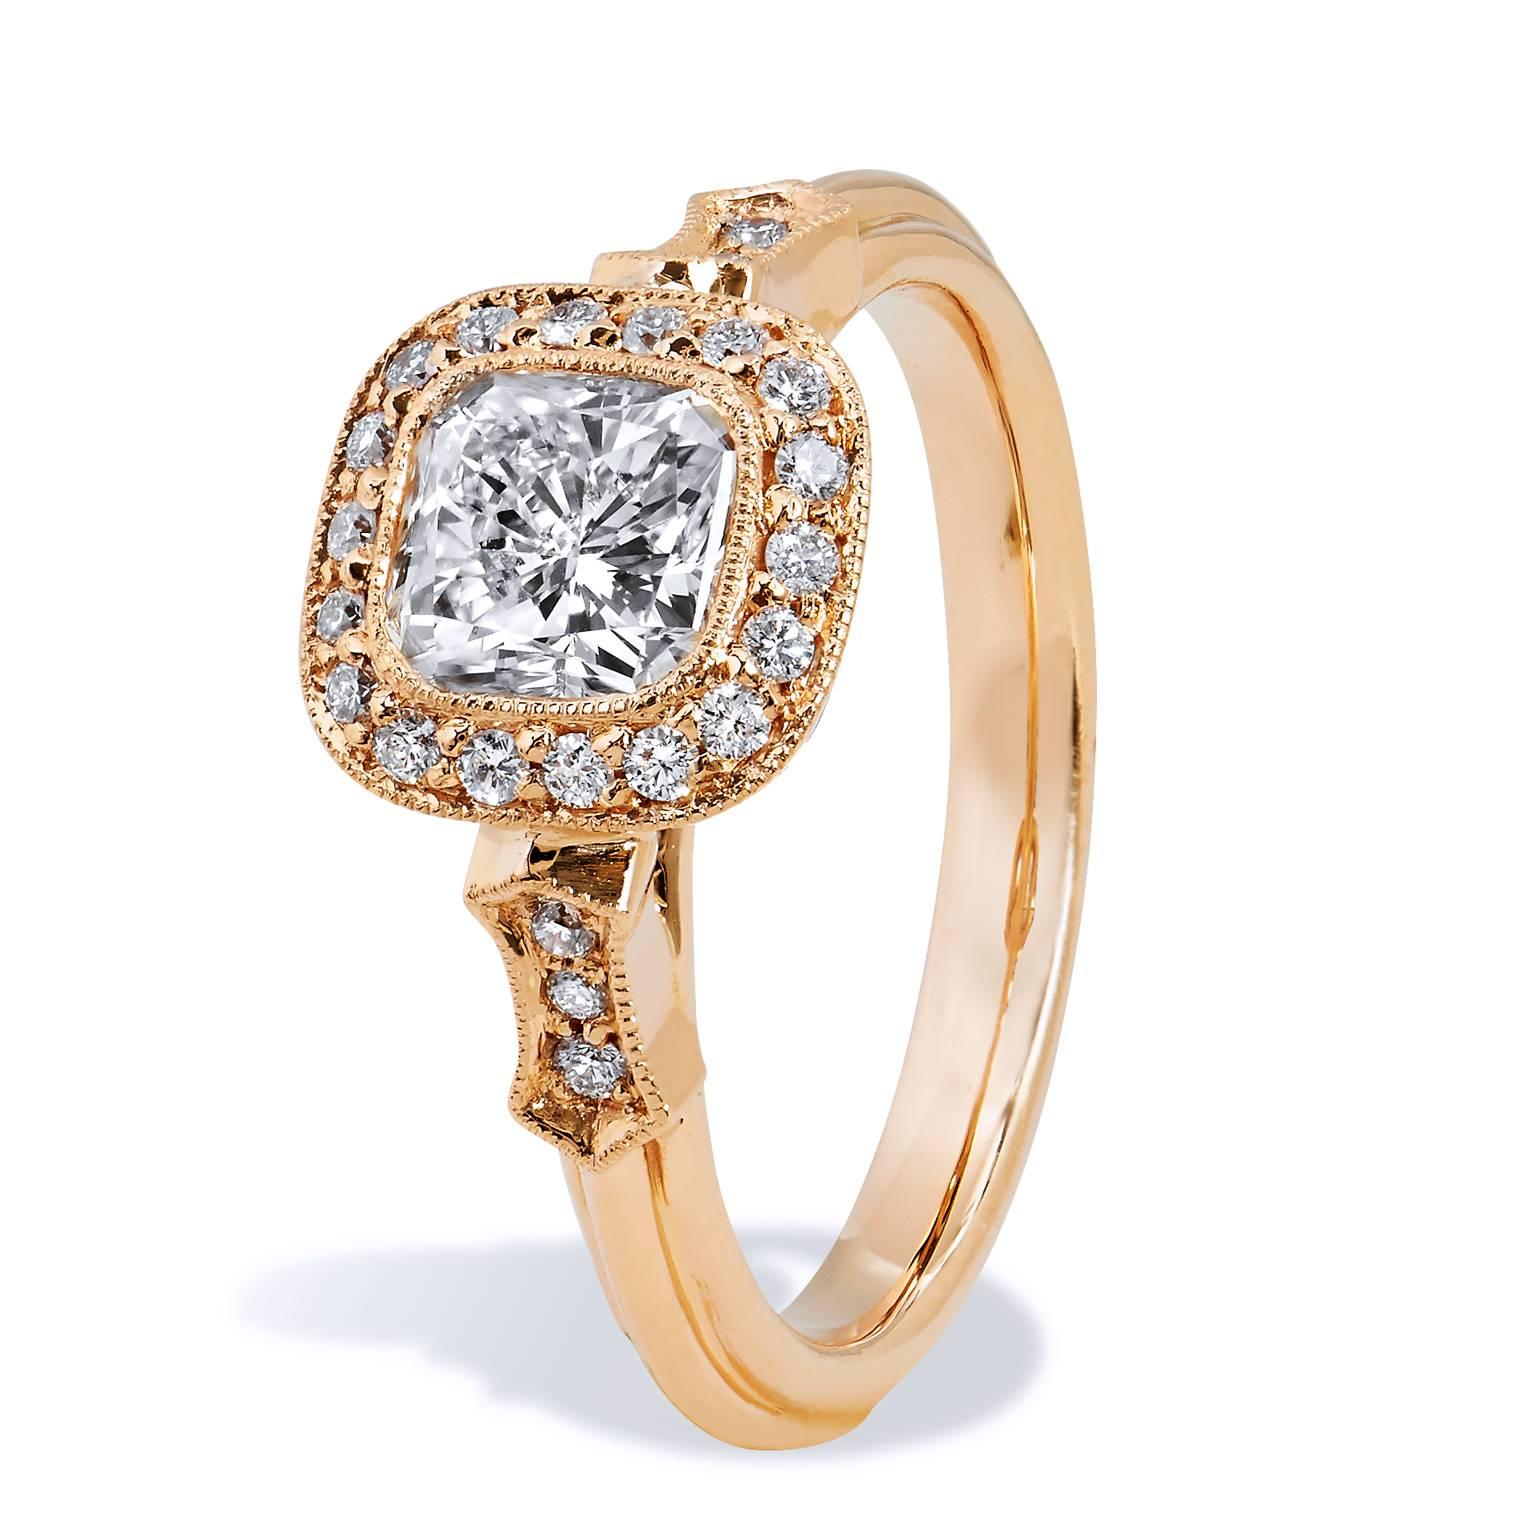 GIA Certified 1.03 Carat Radiant Cut Diamond Two Tone Gold Engagement Ring

This is a one of a kind, handmade ring created by H&H Jewels.  

This is an 18 karat rose gold engagement ring that inspires a sentiment of nostalgia. 
This ring has a